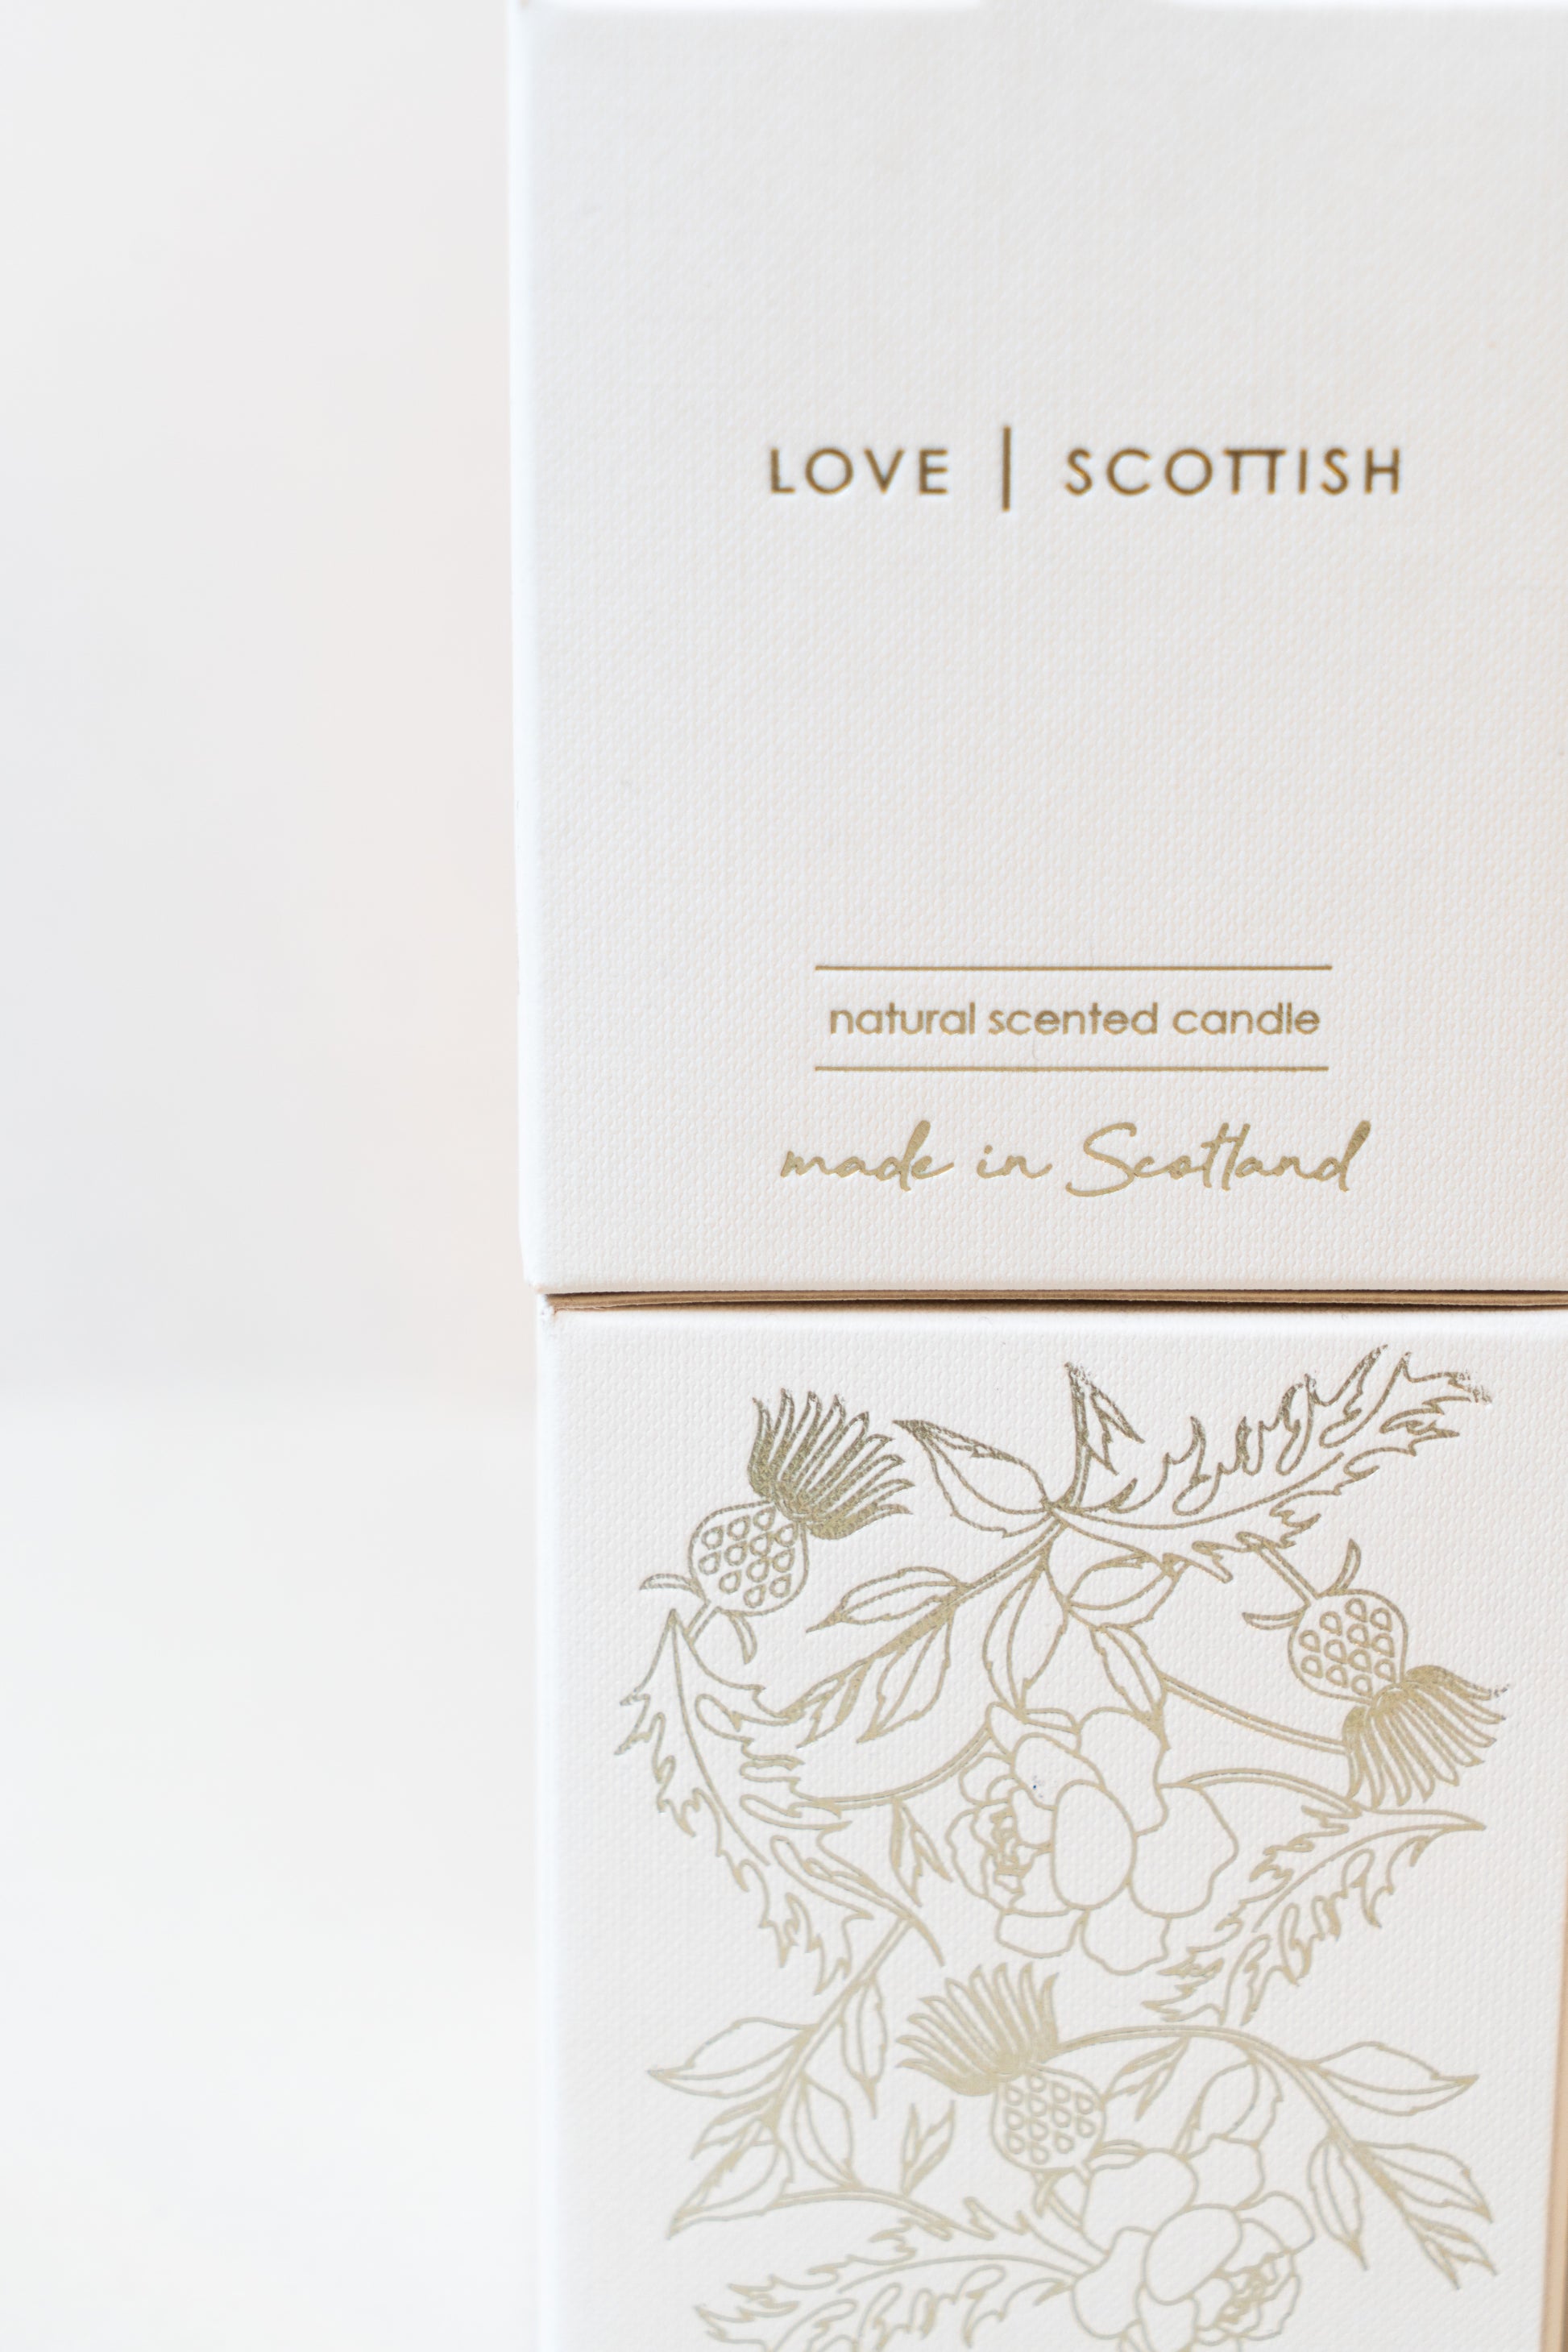 Love Scottish Candle Box on a White Background